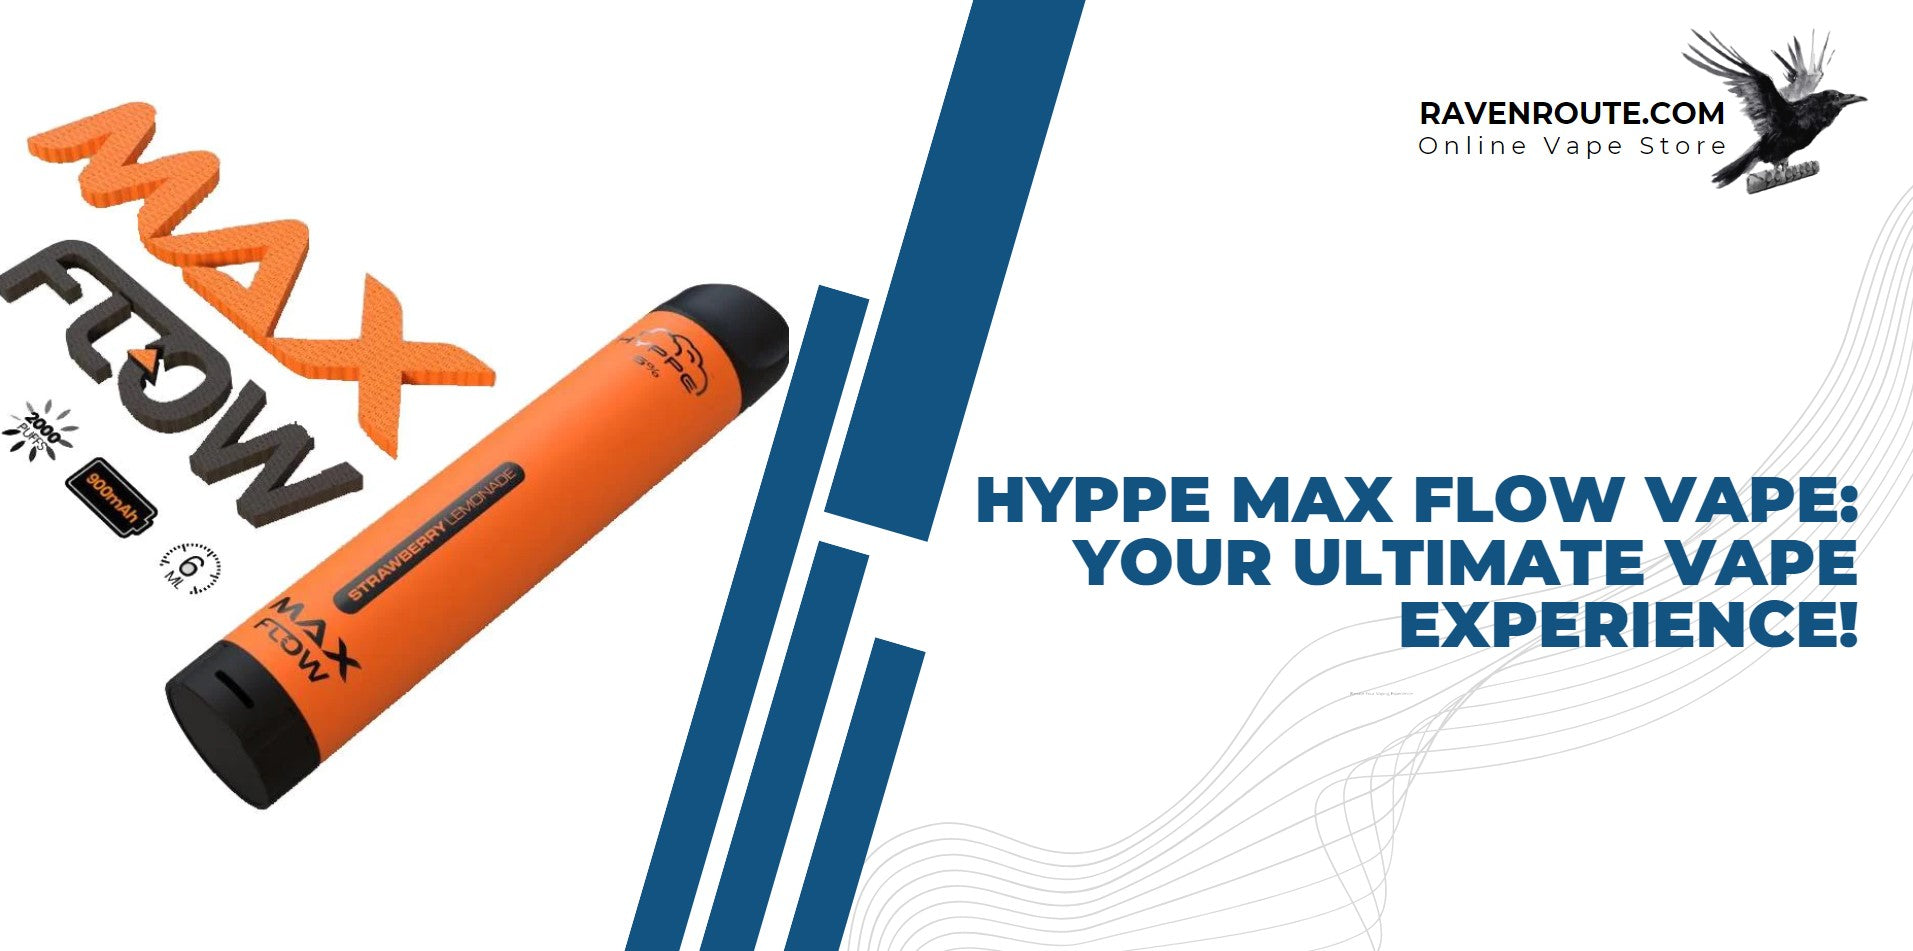 Hyppe Max Flow Vape: Your Ultimate Vape Experience!